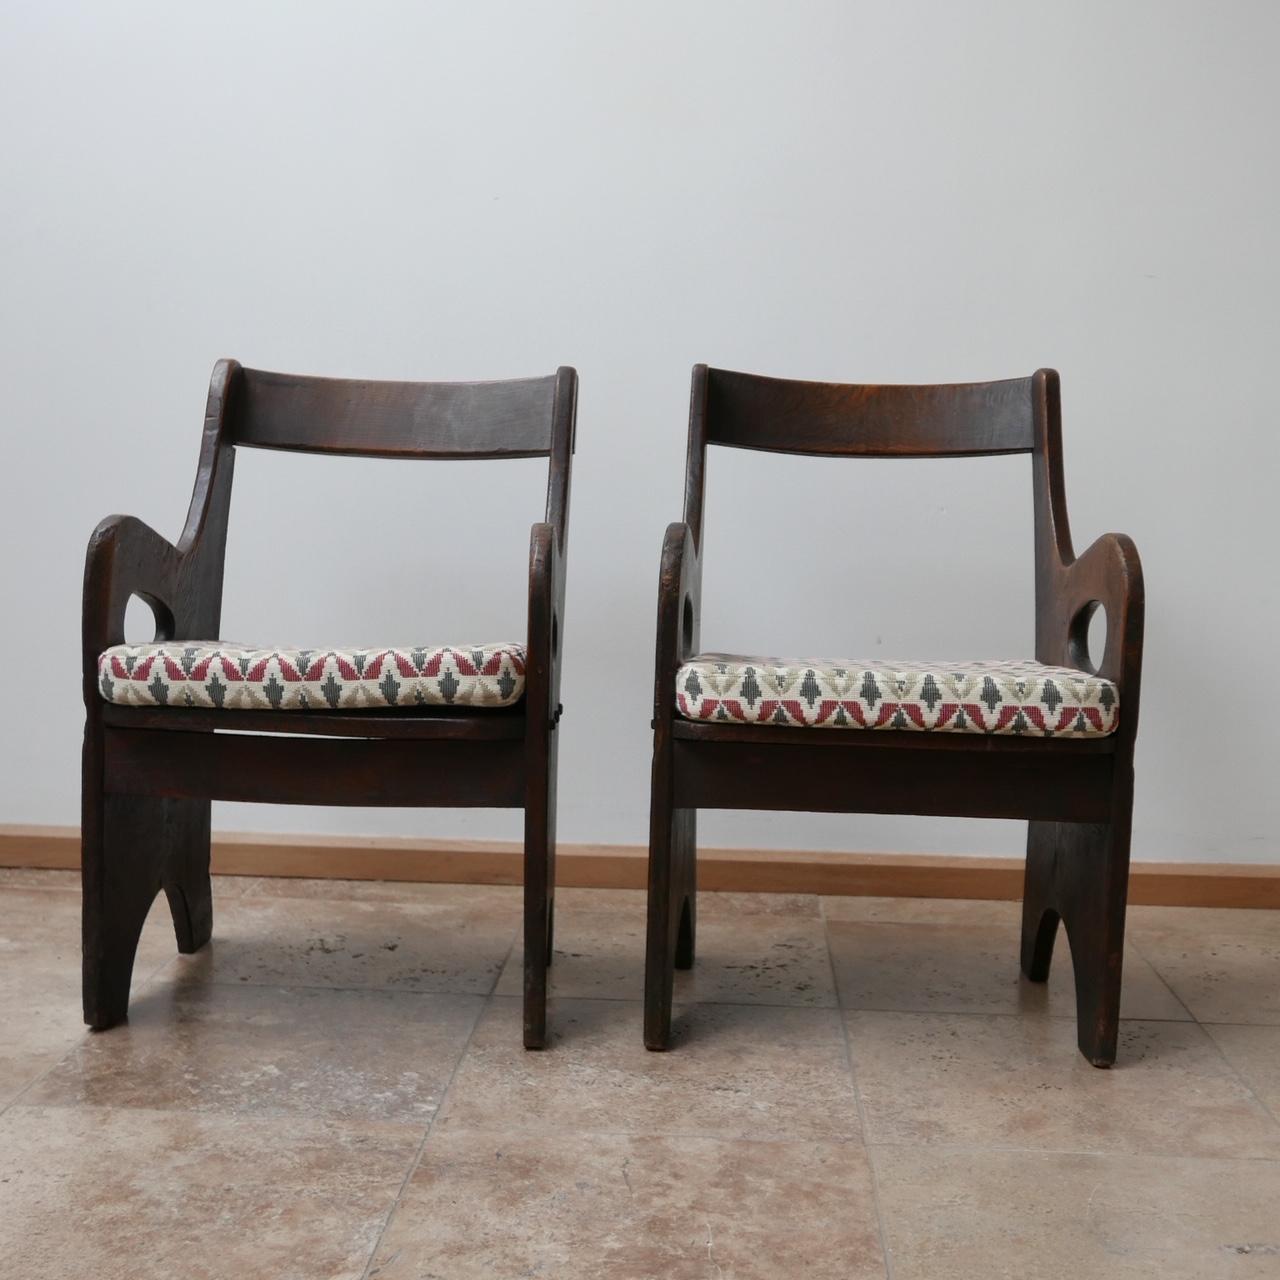 Mid-20th Century Midcentury Brutalist Low Occasional Armchairs